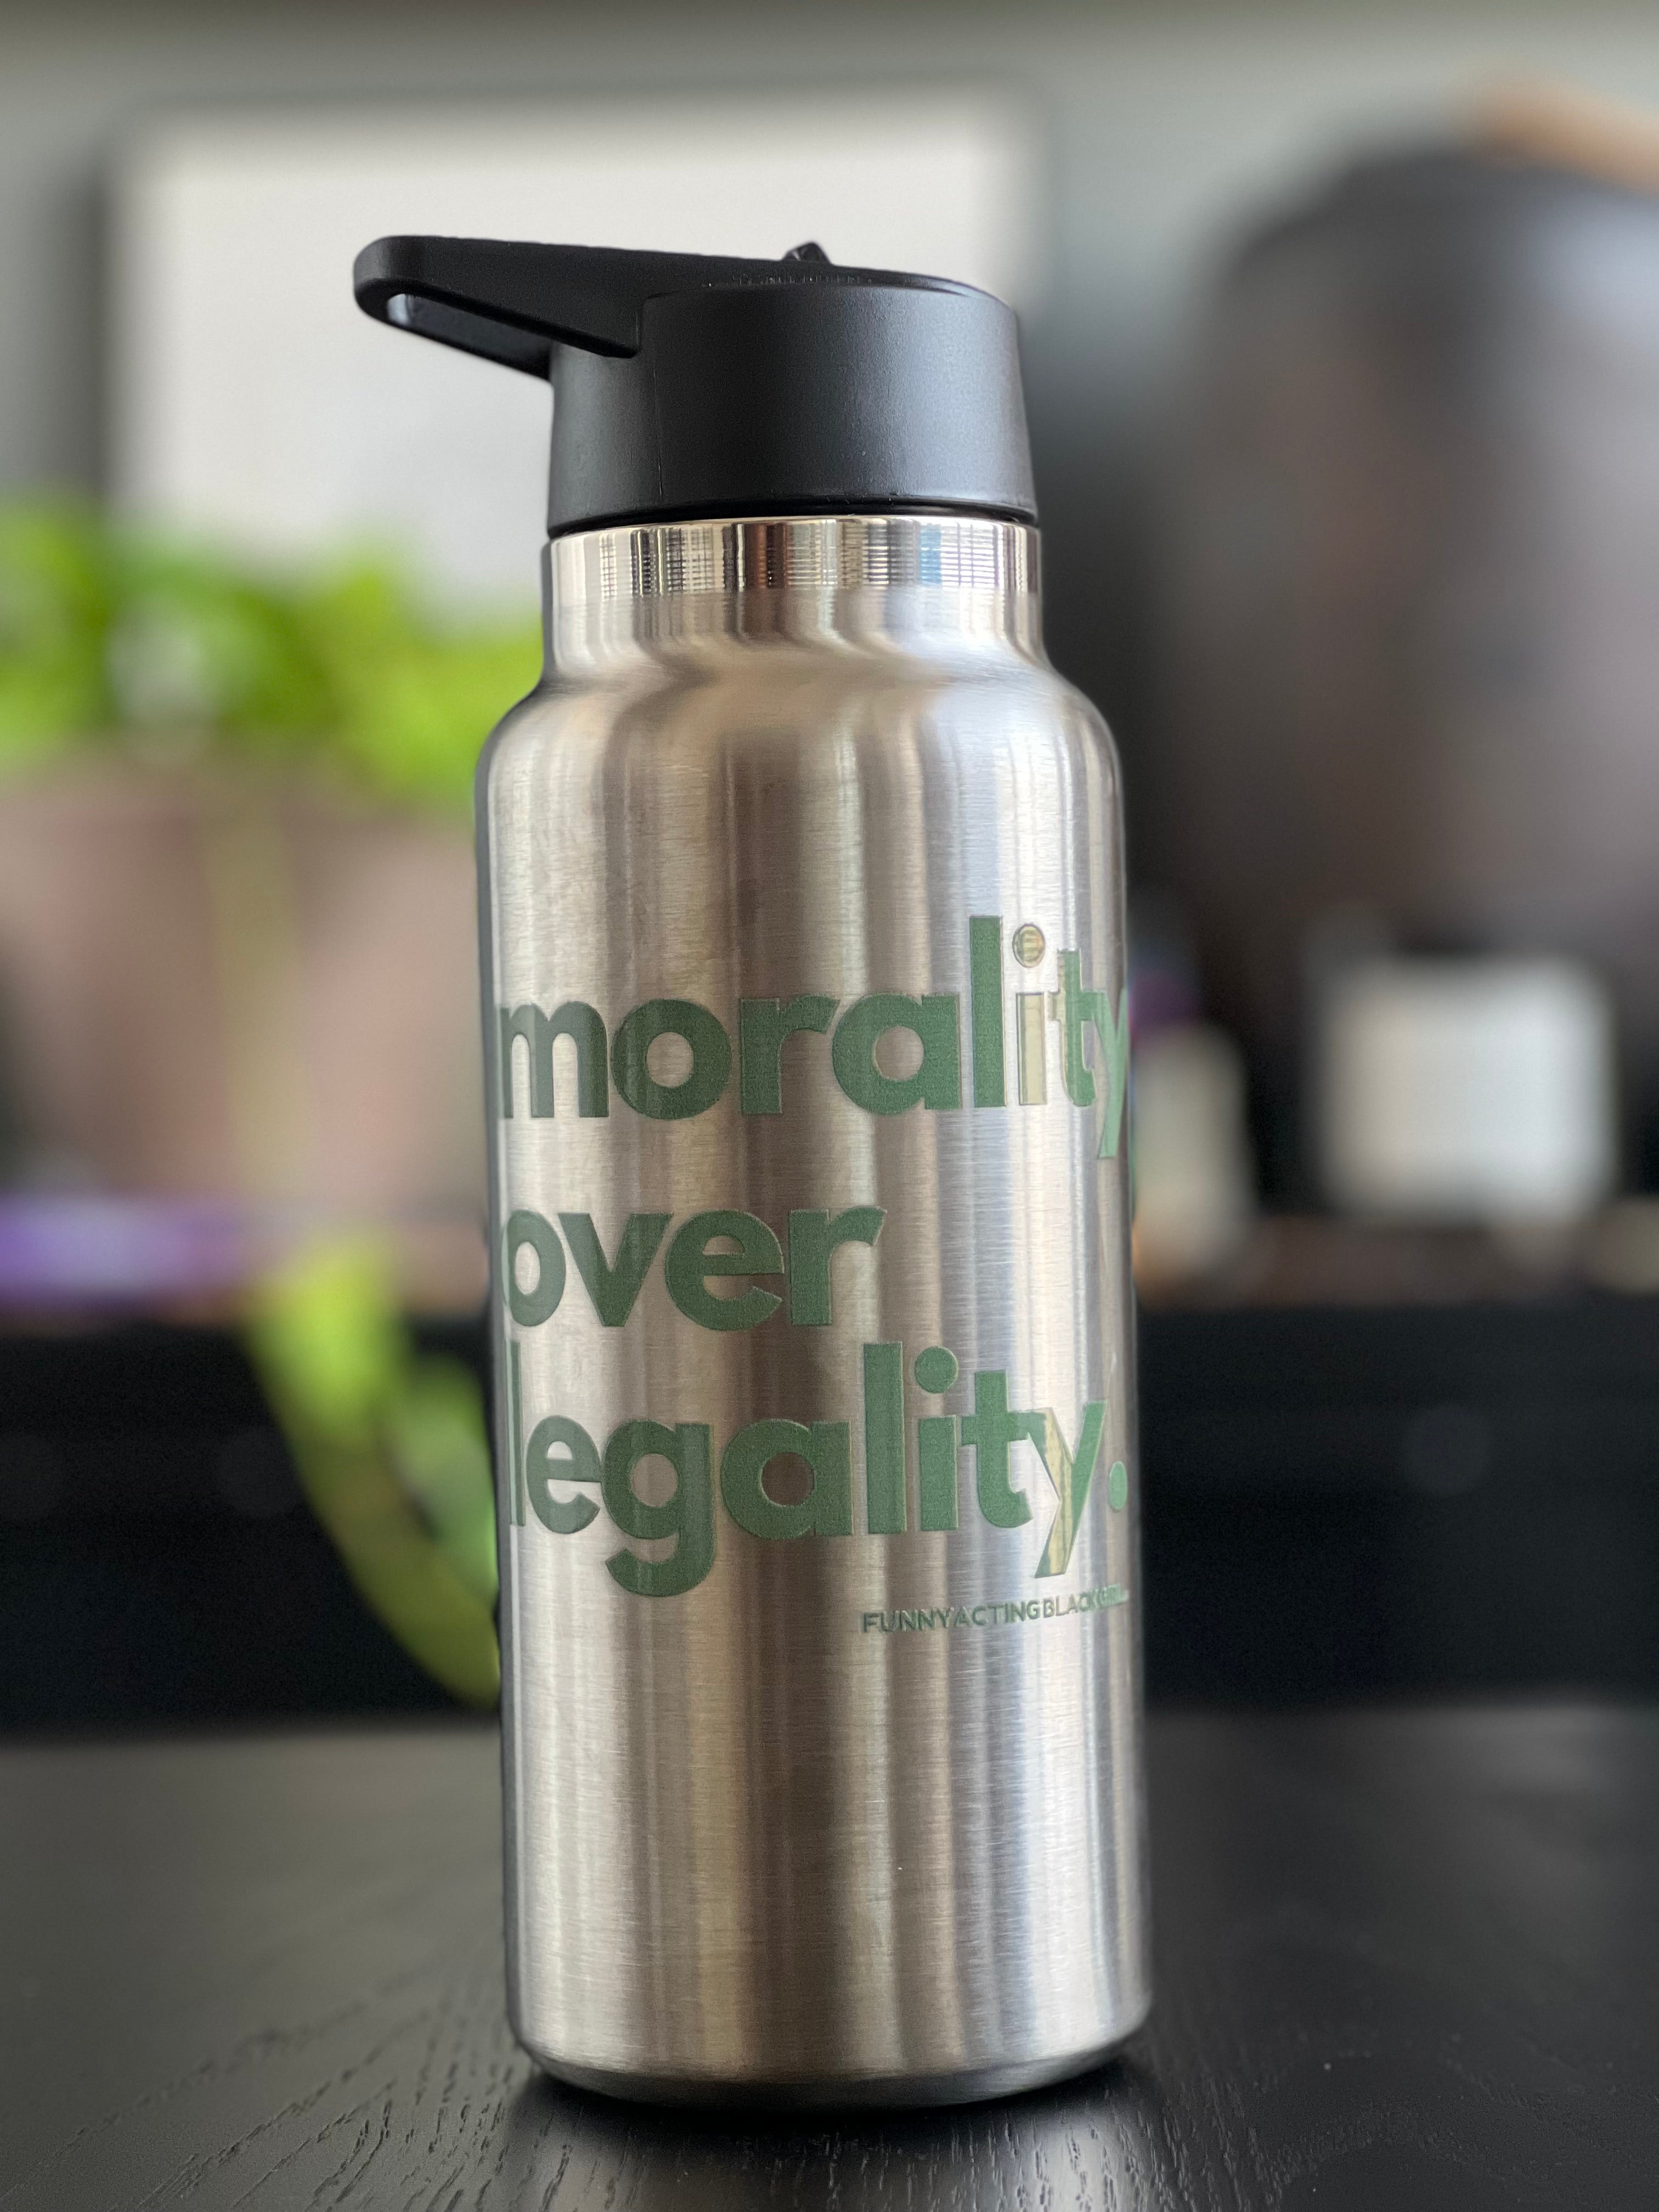 Morality Over Legality: Stainless Steel Water Bottle (32 oz)